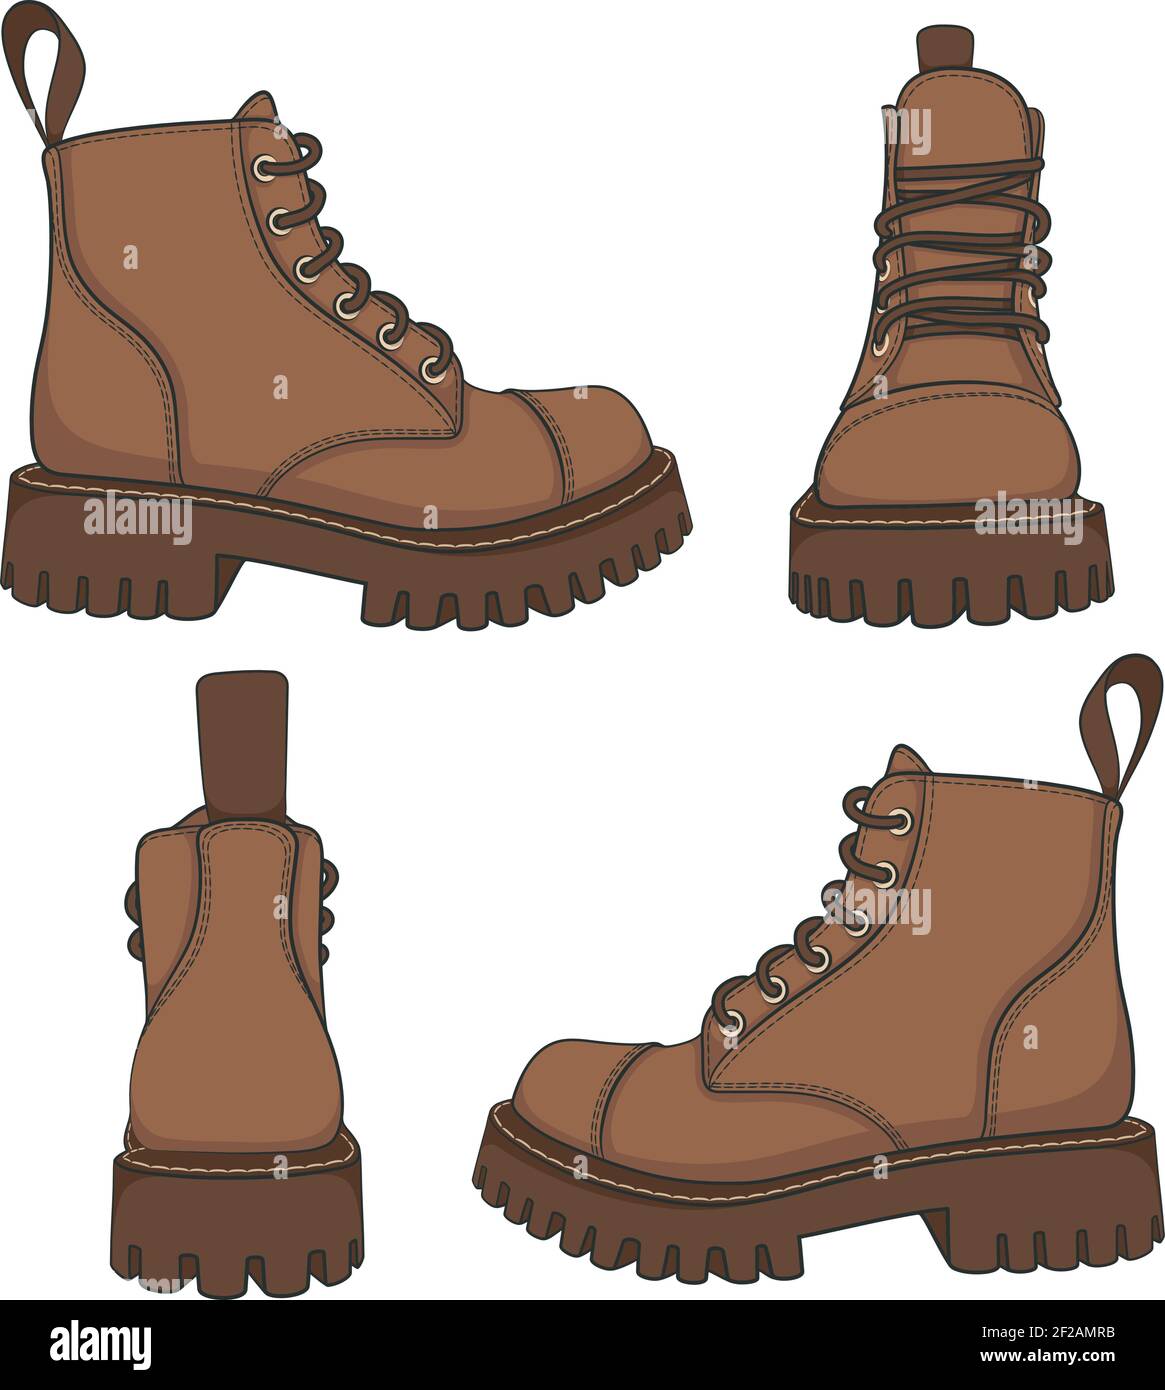 Vector set of drawings with brown boots. Isolated objects on a white background. Stock Vector